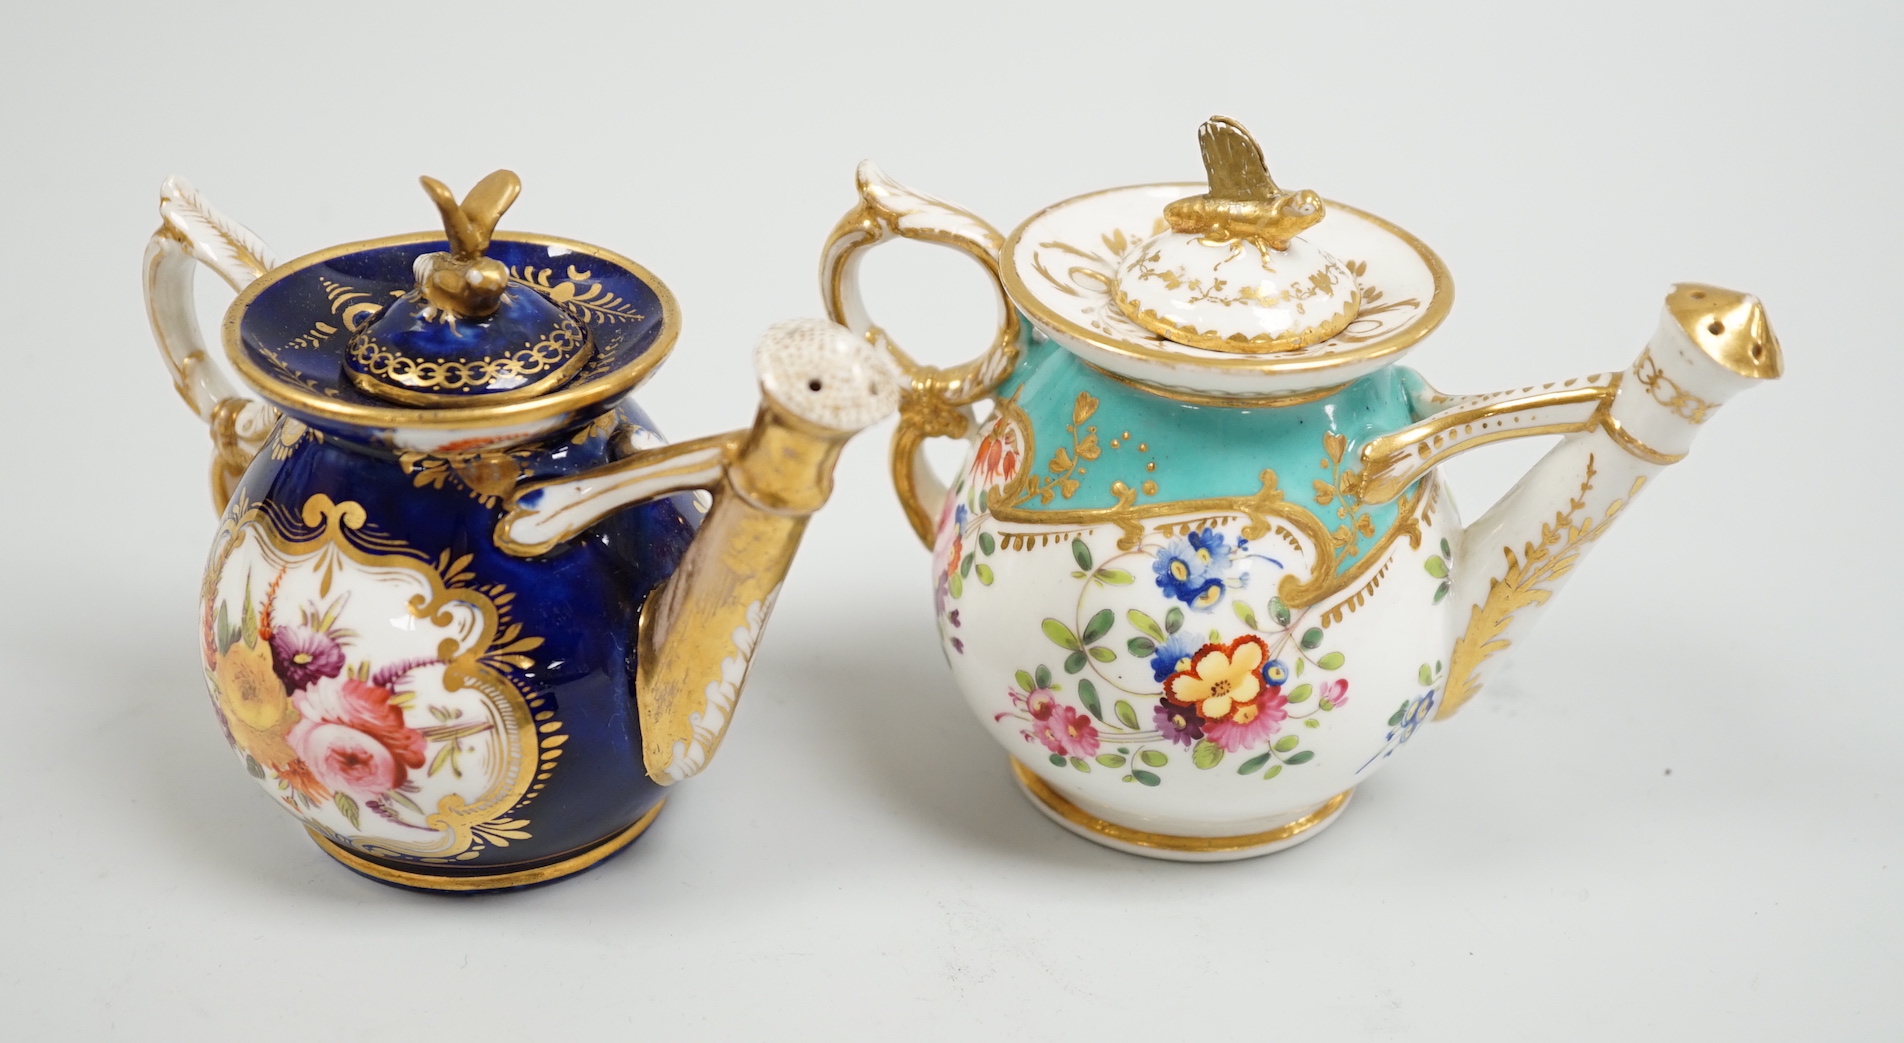 Toy porcelain. Two English rosewater sprinklers, c.1820, possibly Coalport, each modelled in the form of a watering can, tallest 9cm high